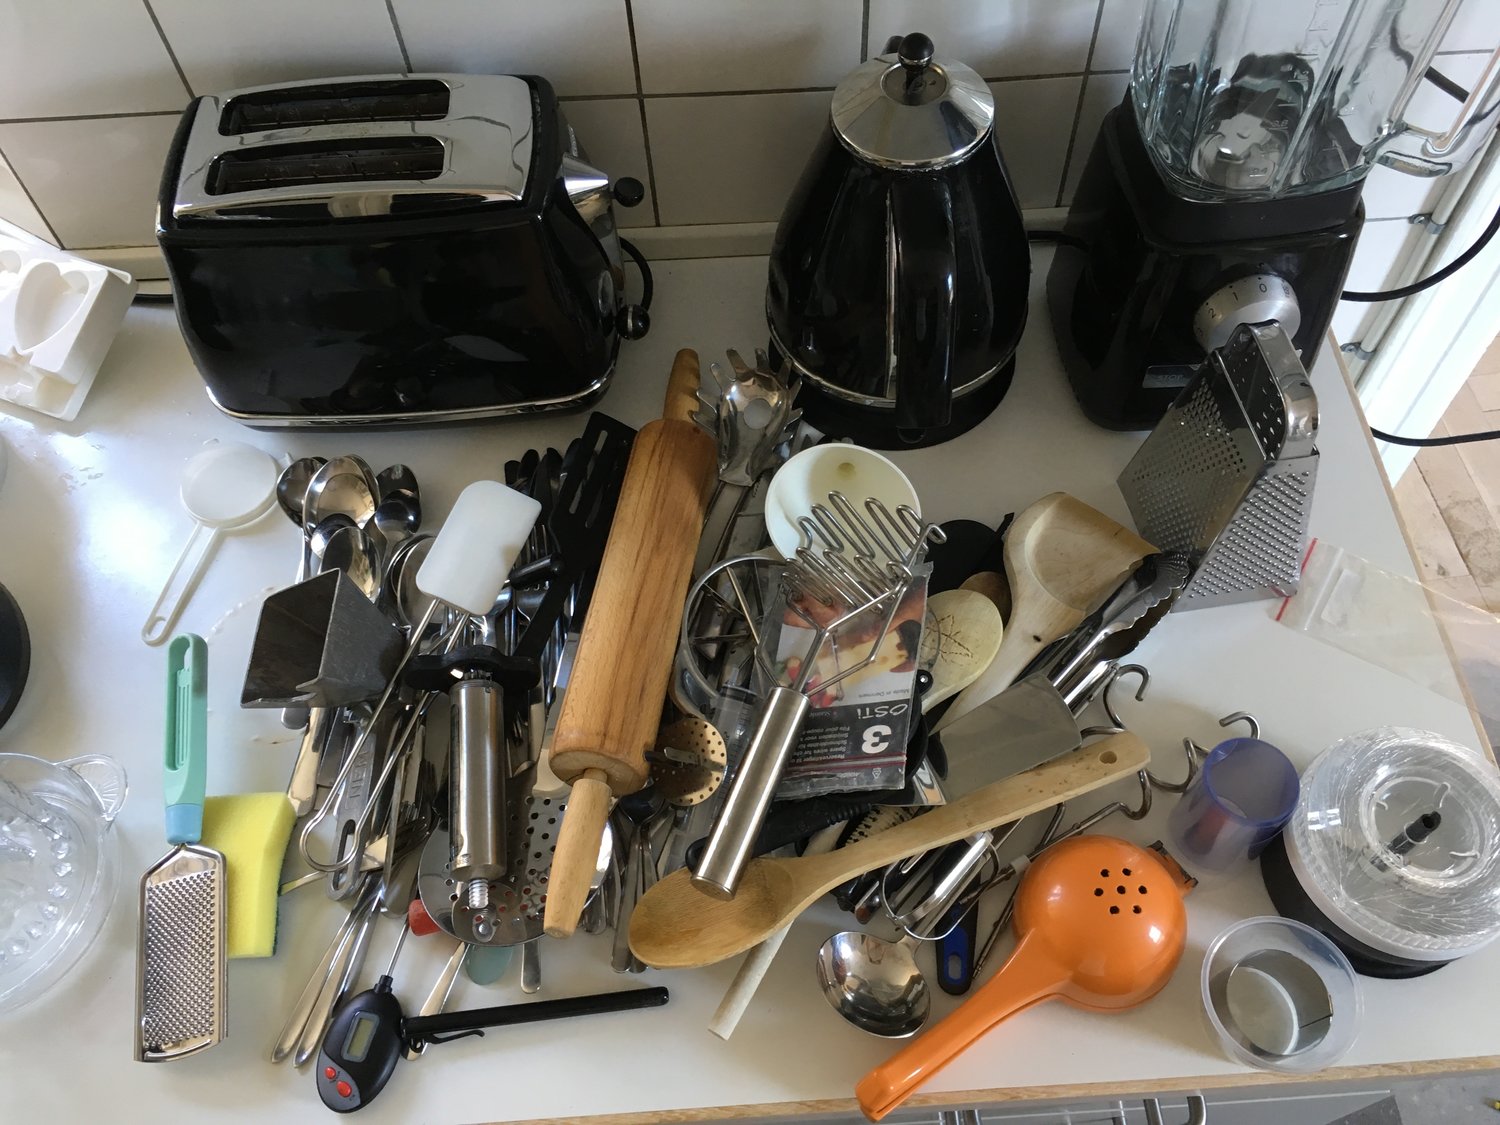 Kitchen tools during